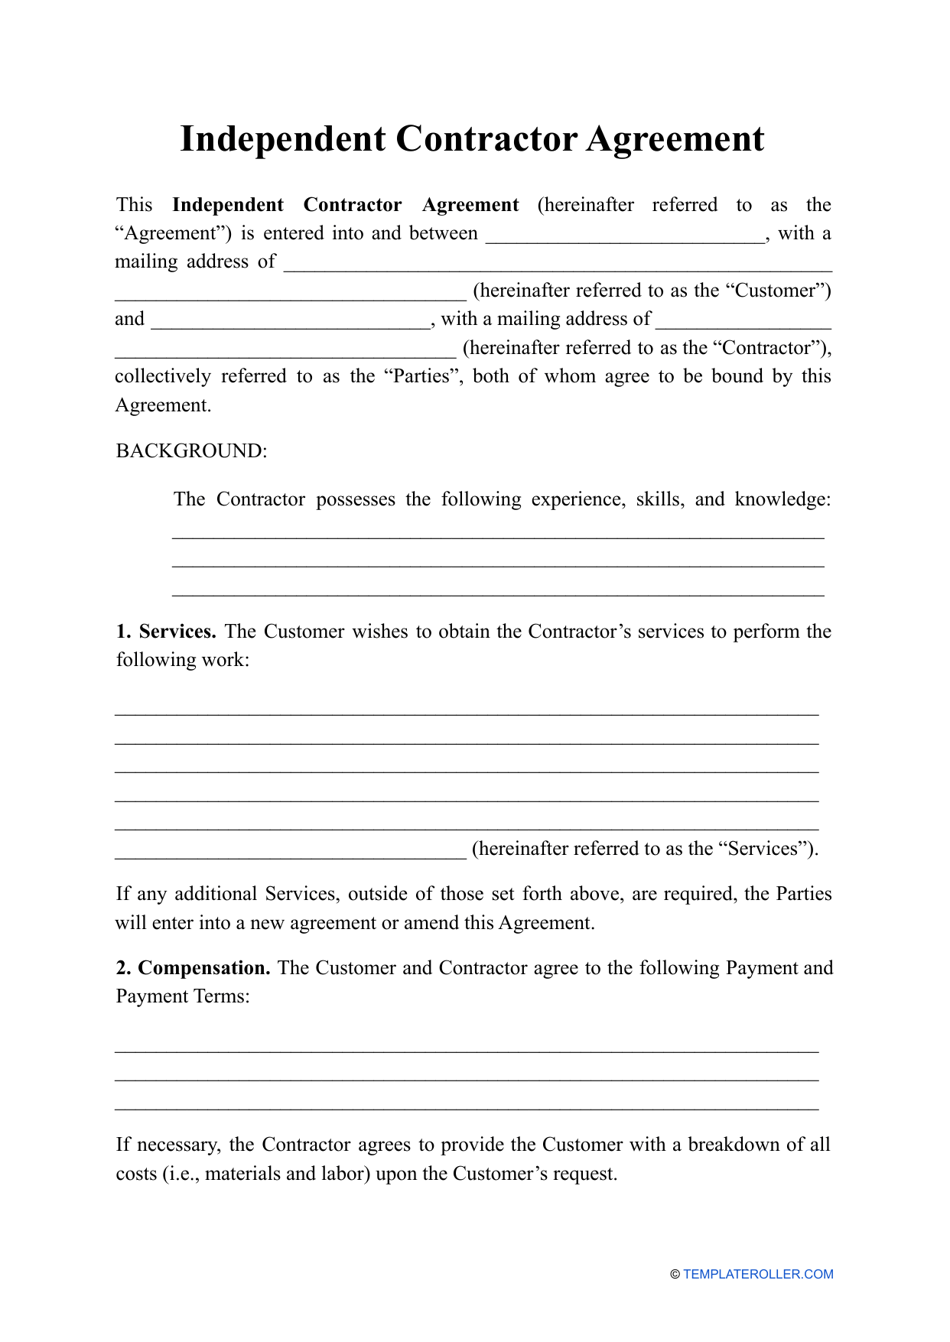 Independent Contractor Agreement Template Download Printable Pdf Templateroller